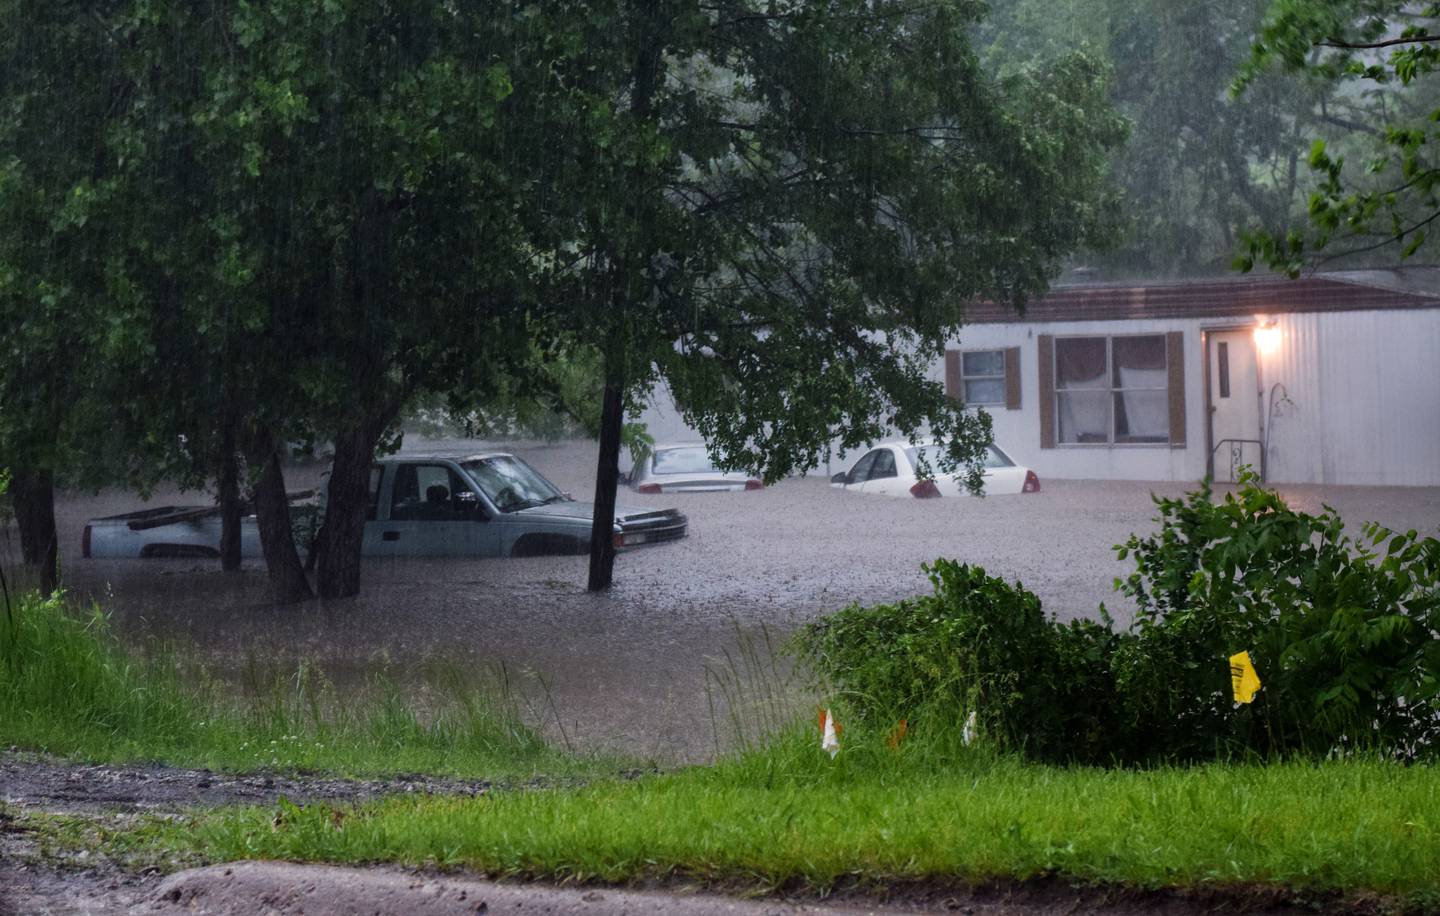 Vehicles and a home in Lambs Grove on May 21 are almost completely submerged in floodwater. Several communities in Jasper County were affected by the floods after a full night of heavy rainfall and even more sporadic downpours the next day.